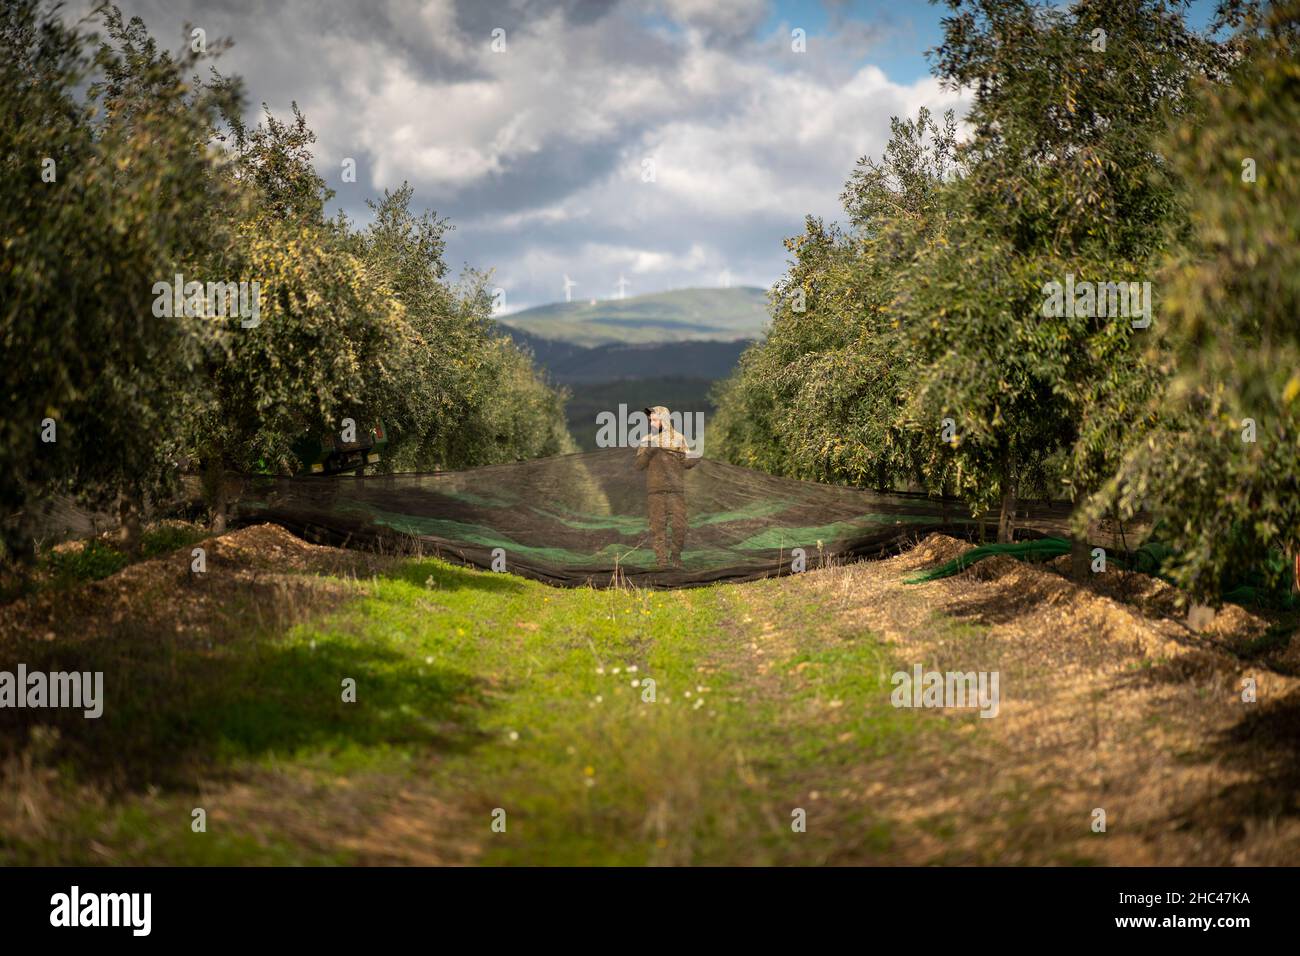 Man harvesting olives on an olive grove Stock Photo